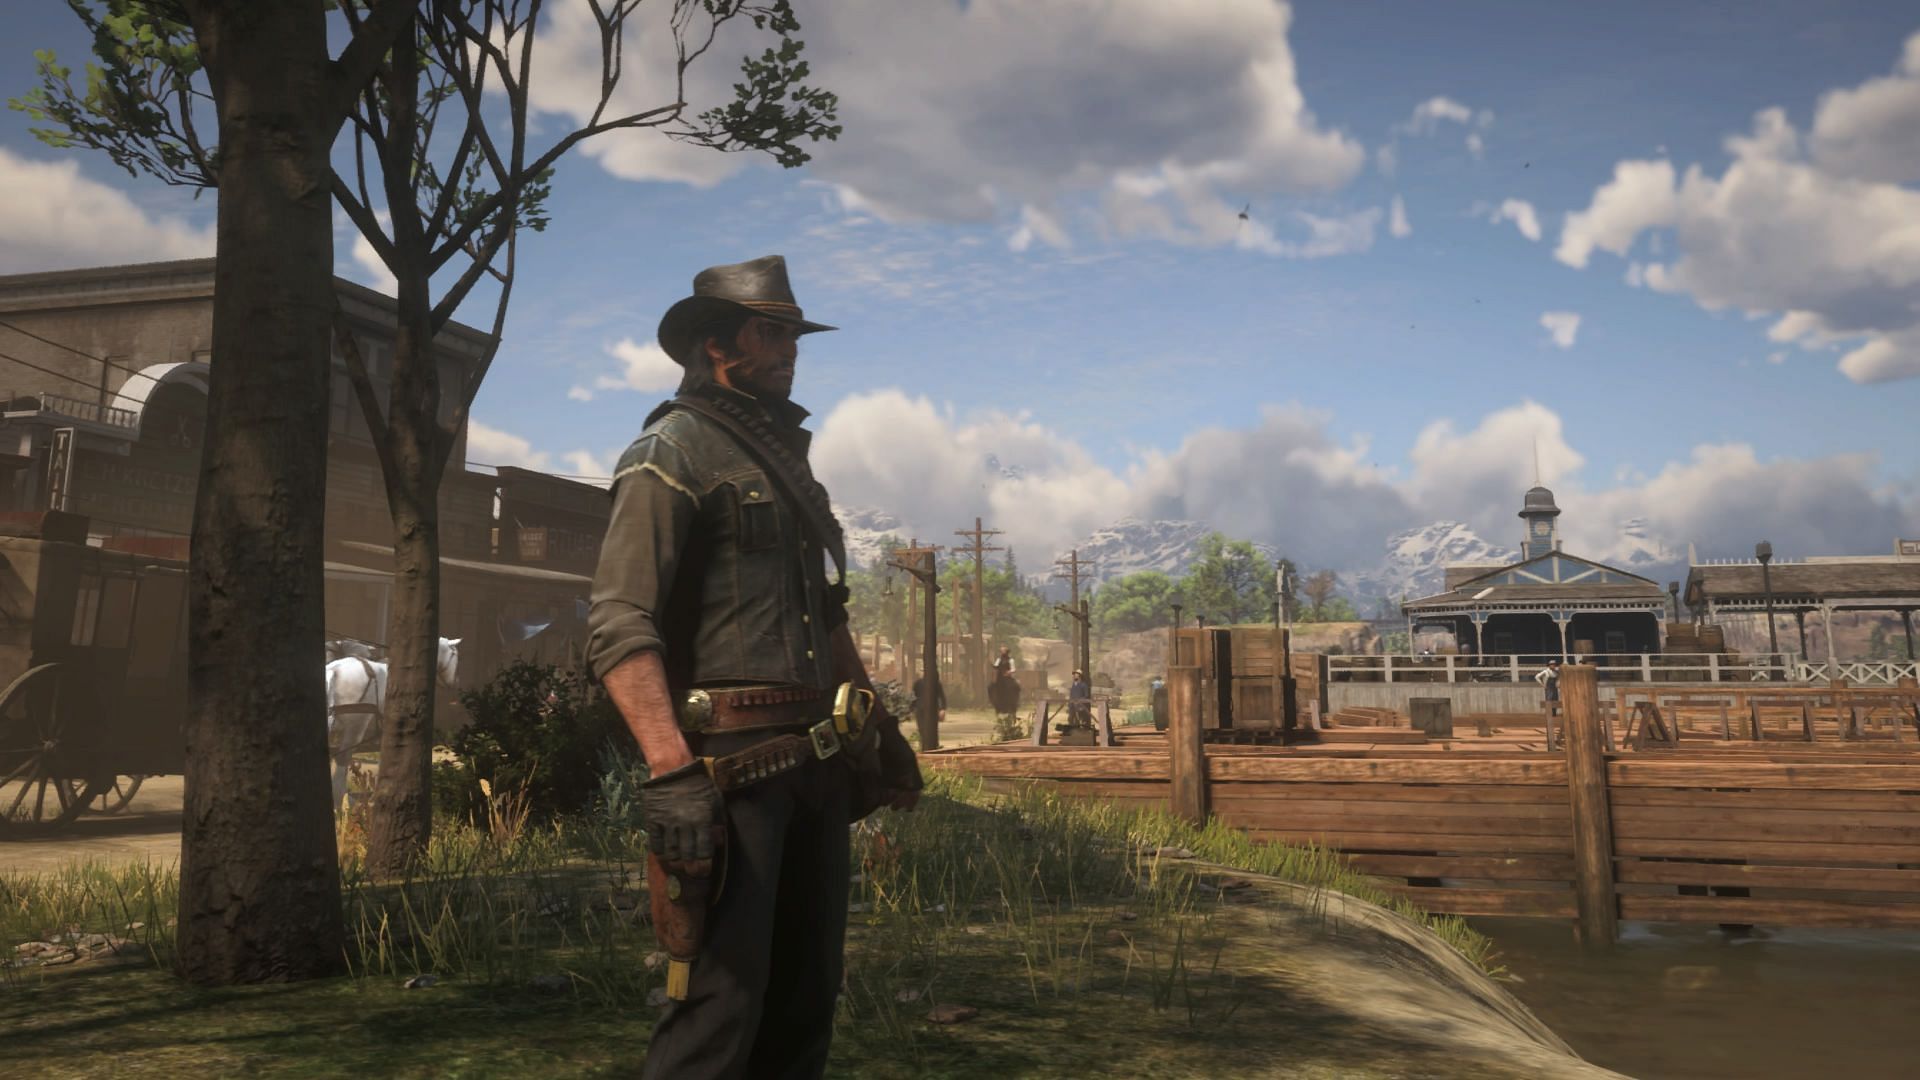  Red Dead Redemption remake has a lot to prove (Image via Twitter/JaybillsGames)